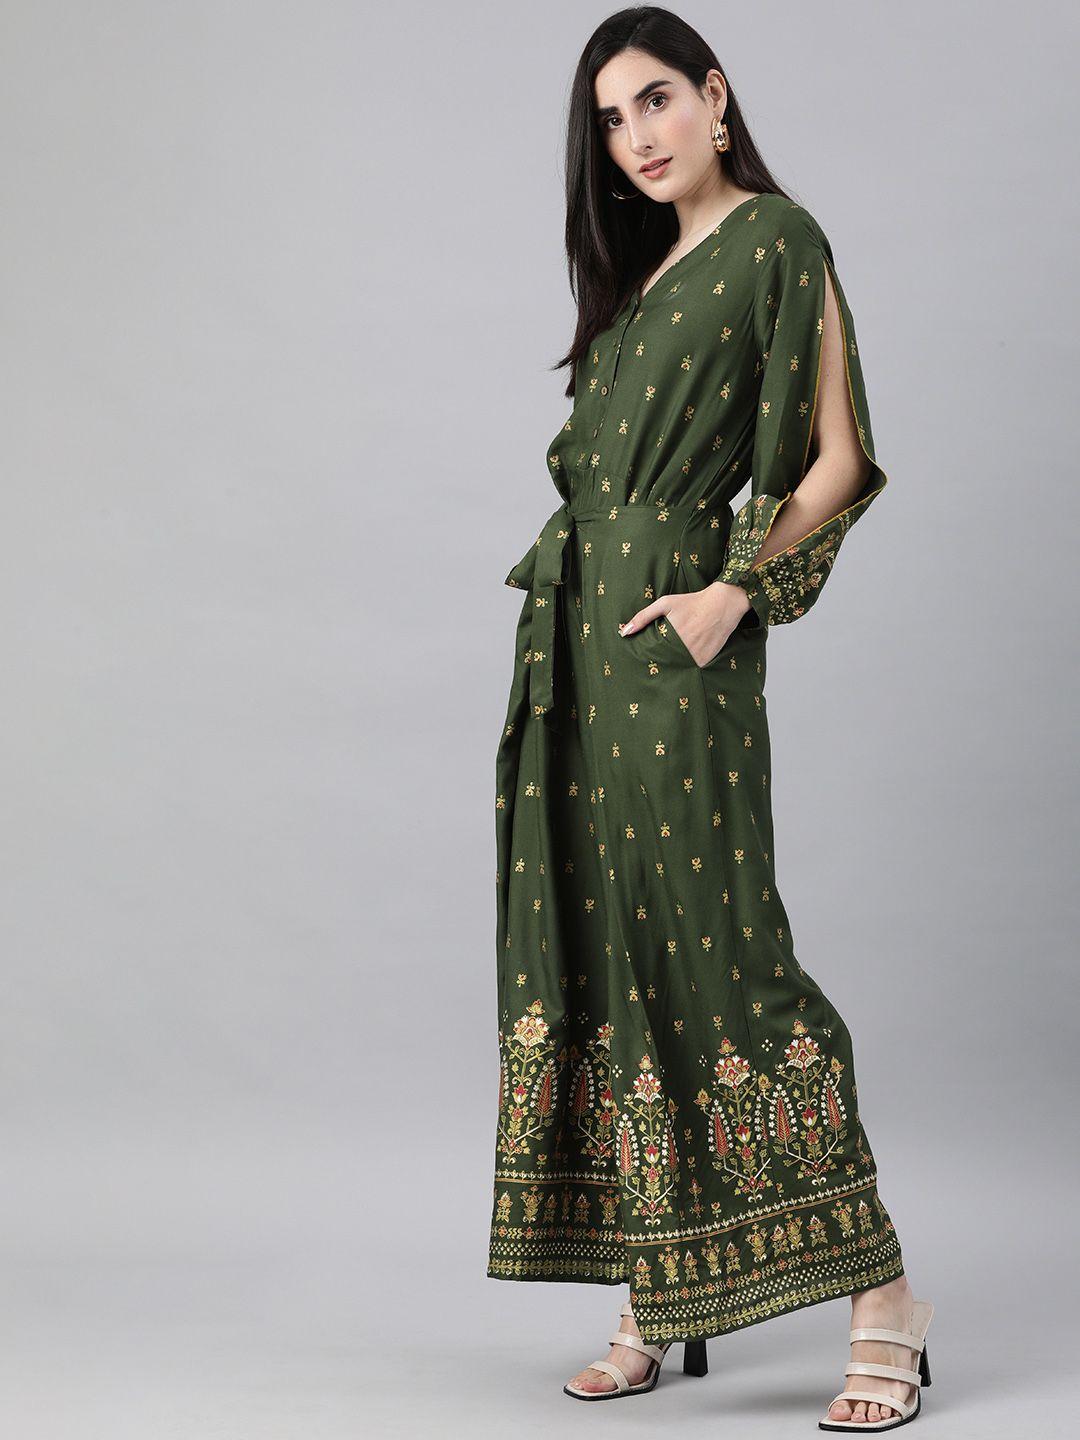 global desi women olive green printed basic jumpsuit with layered detail